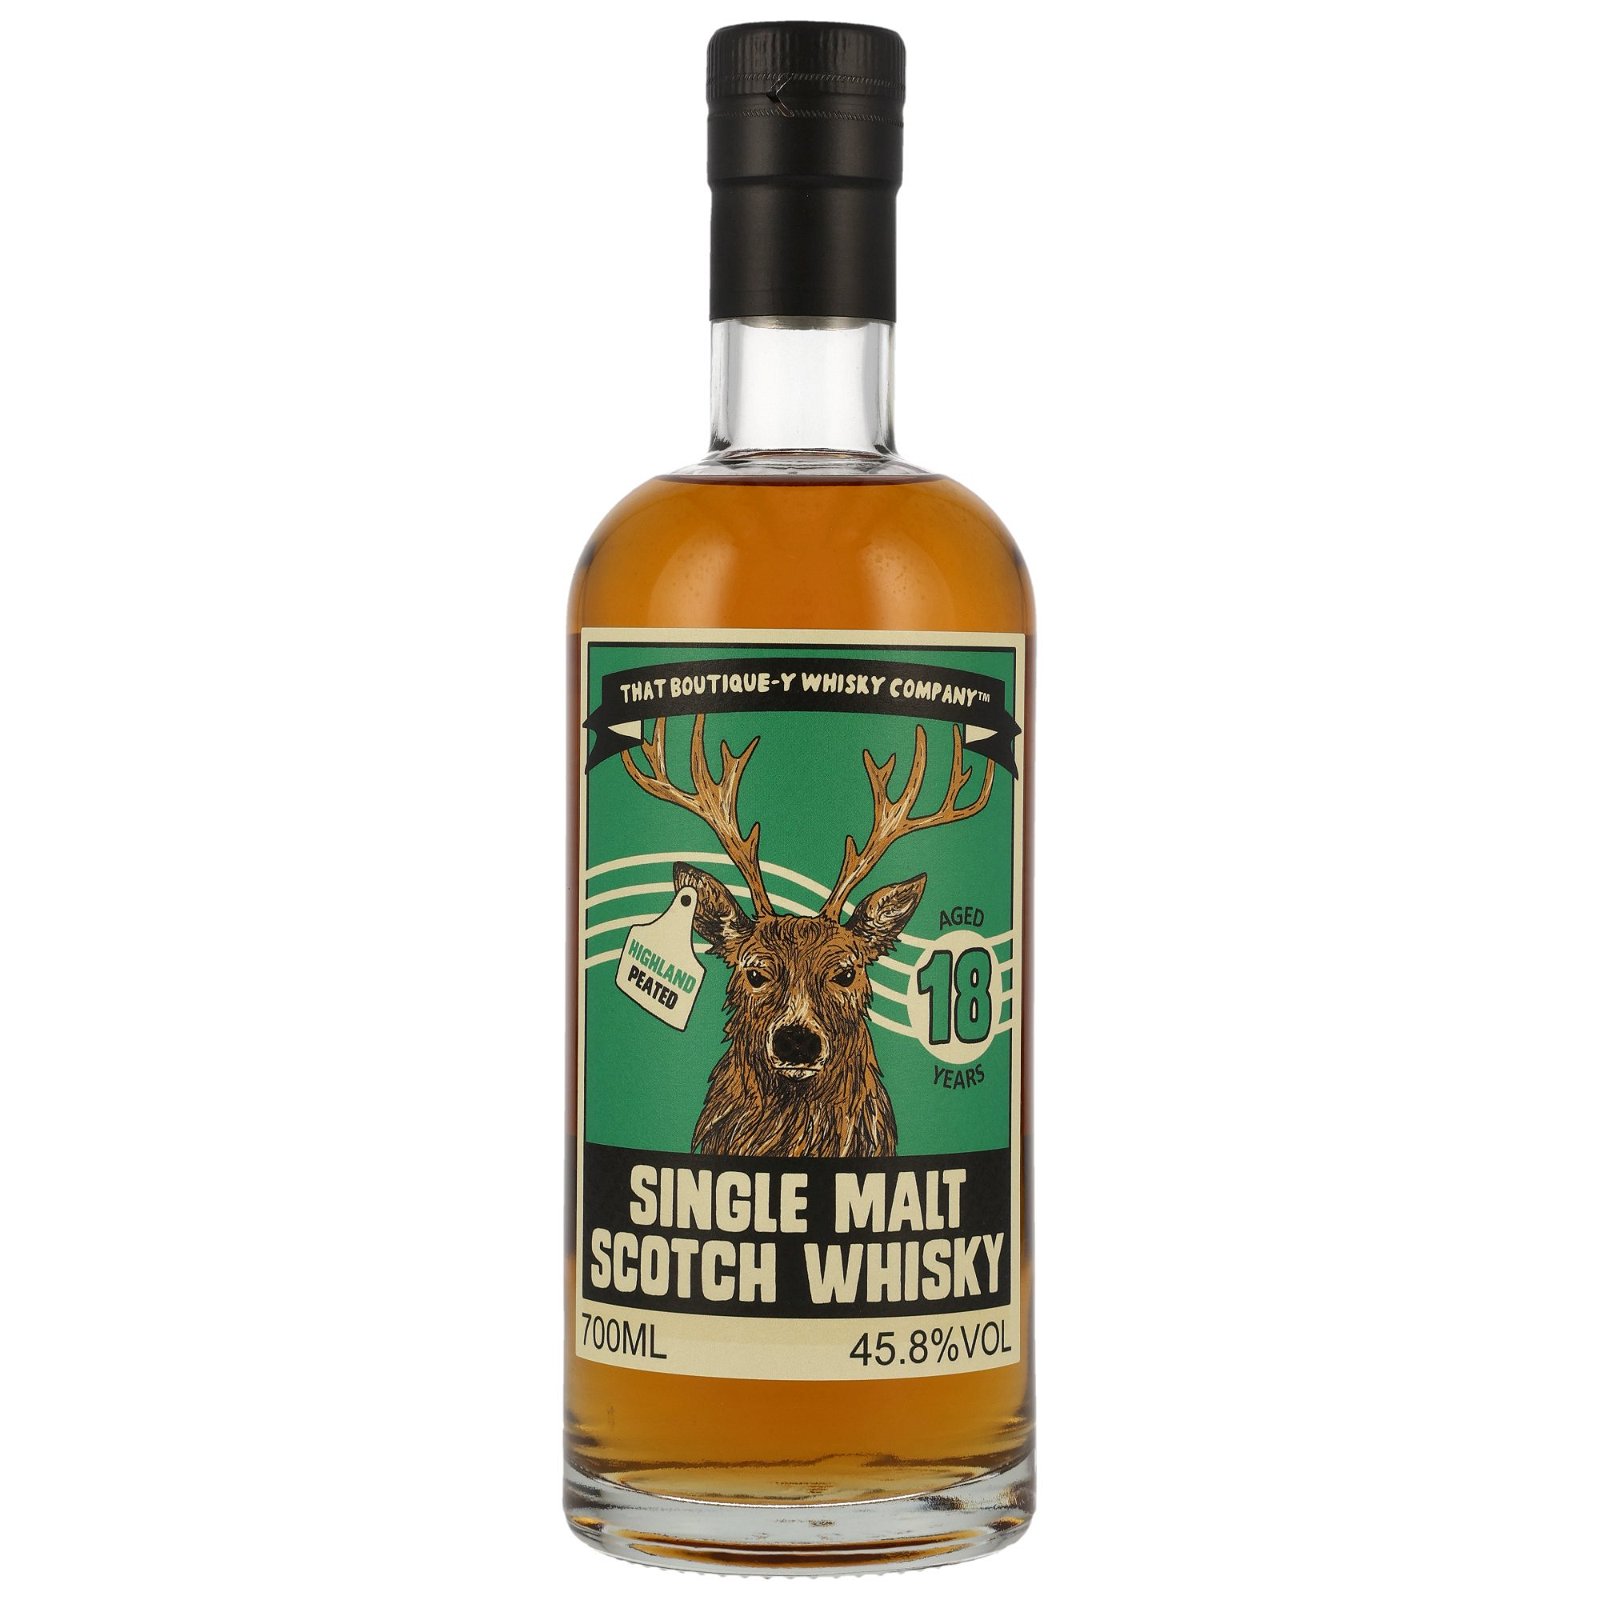 Peated Highland Single Malt Scotch Whisky 18 Jahre (That Boutique-y Whisky Company)